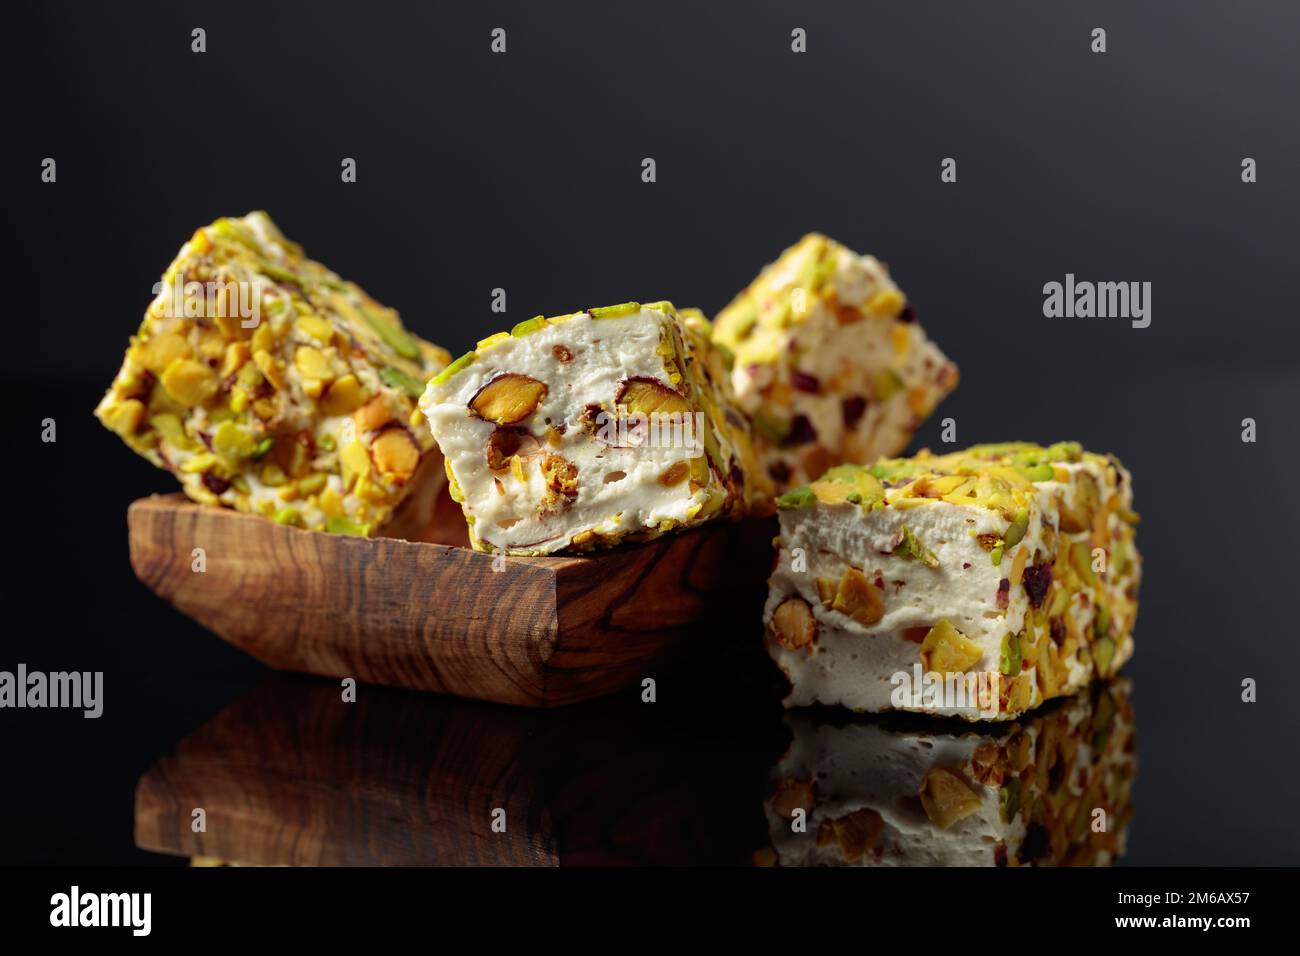 Traditional Turkish delight in a wooden dish on a black reflective background. Stock Photo